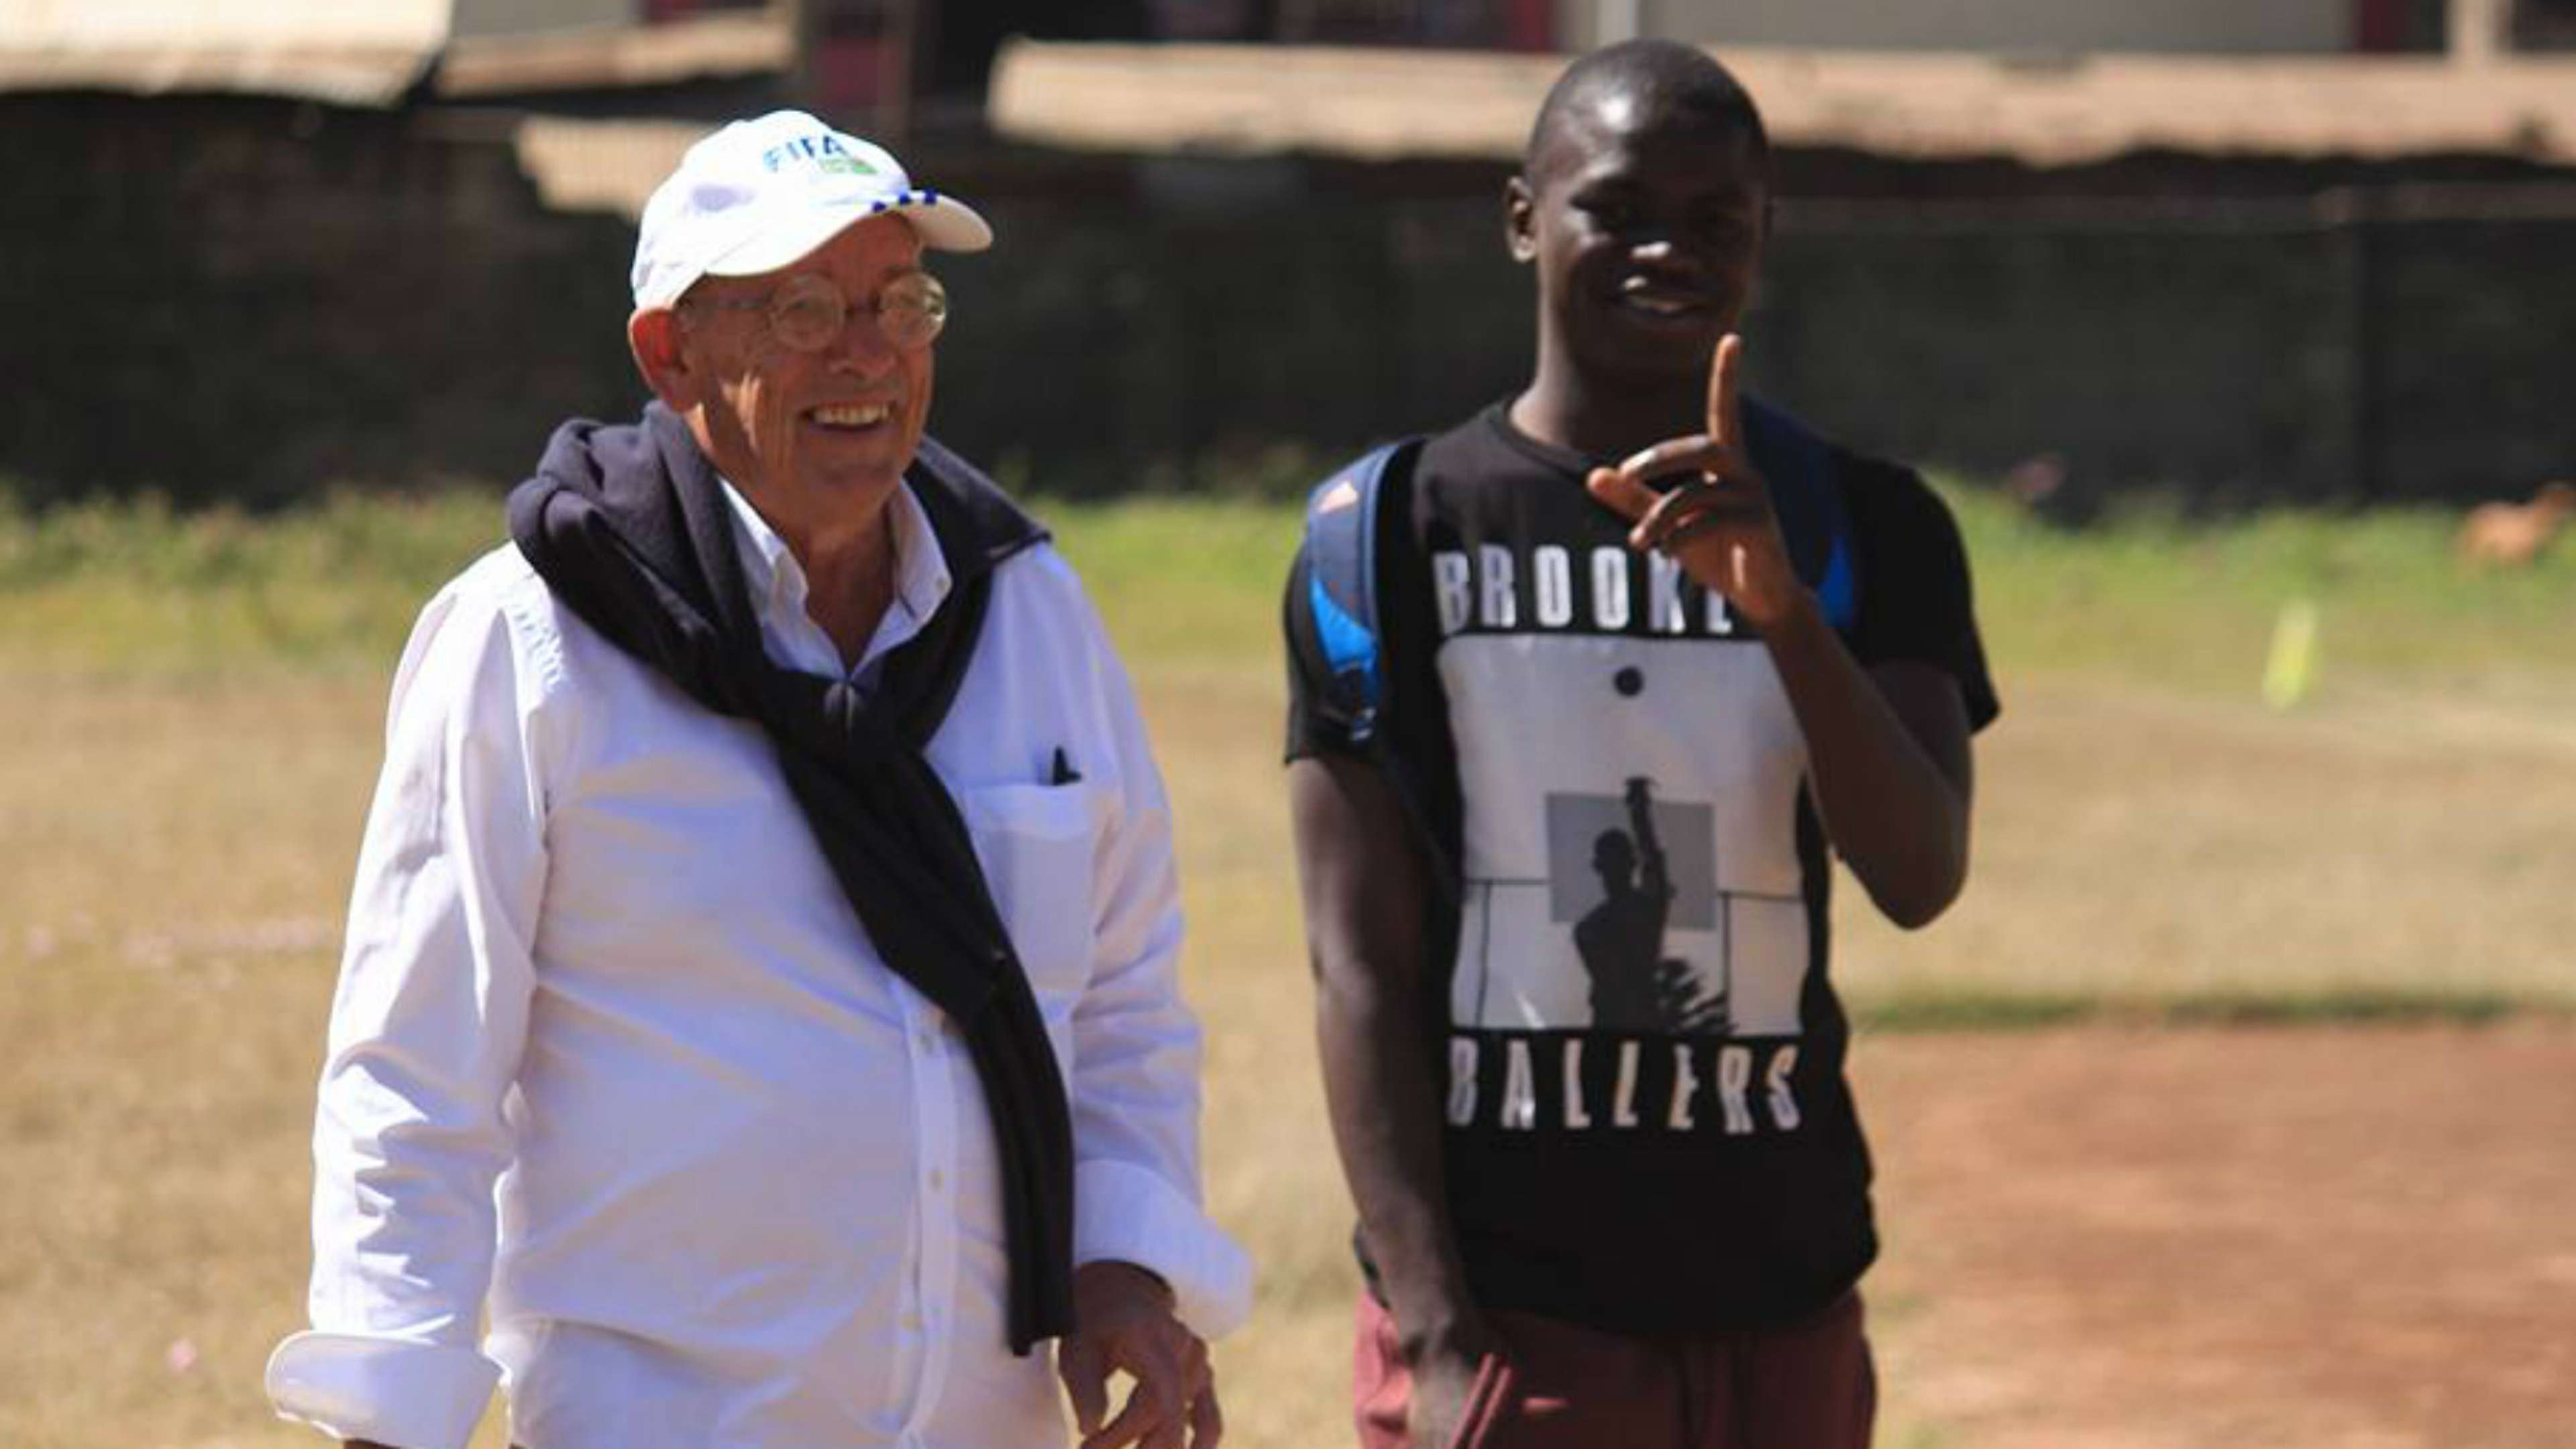 Mathare United chairman Bob Munro and Erick Johanna looked jovial throughout the training session.